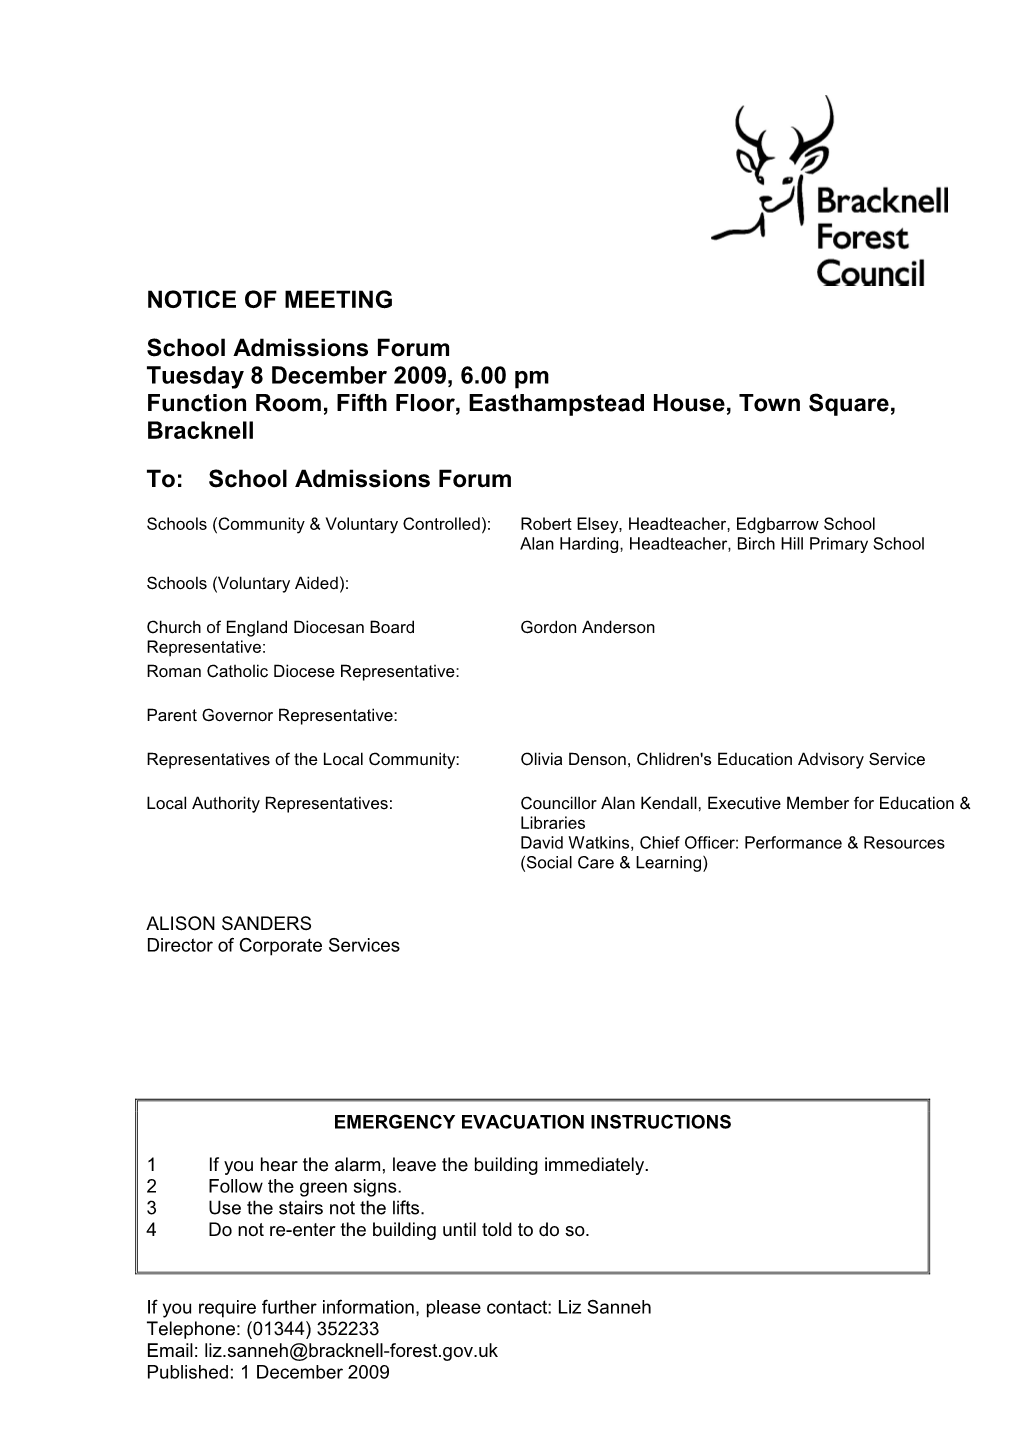 NOTICE of MEETING School Admissions Forum Tuesday 8 December 2009, 6.00 Pm Function Room, Fifth Floor, Easthampstead House, Town Square, Bracknell